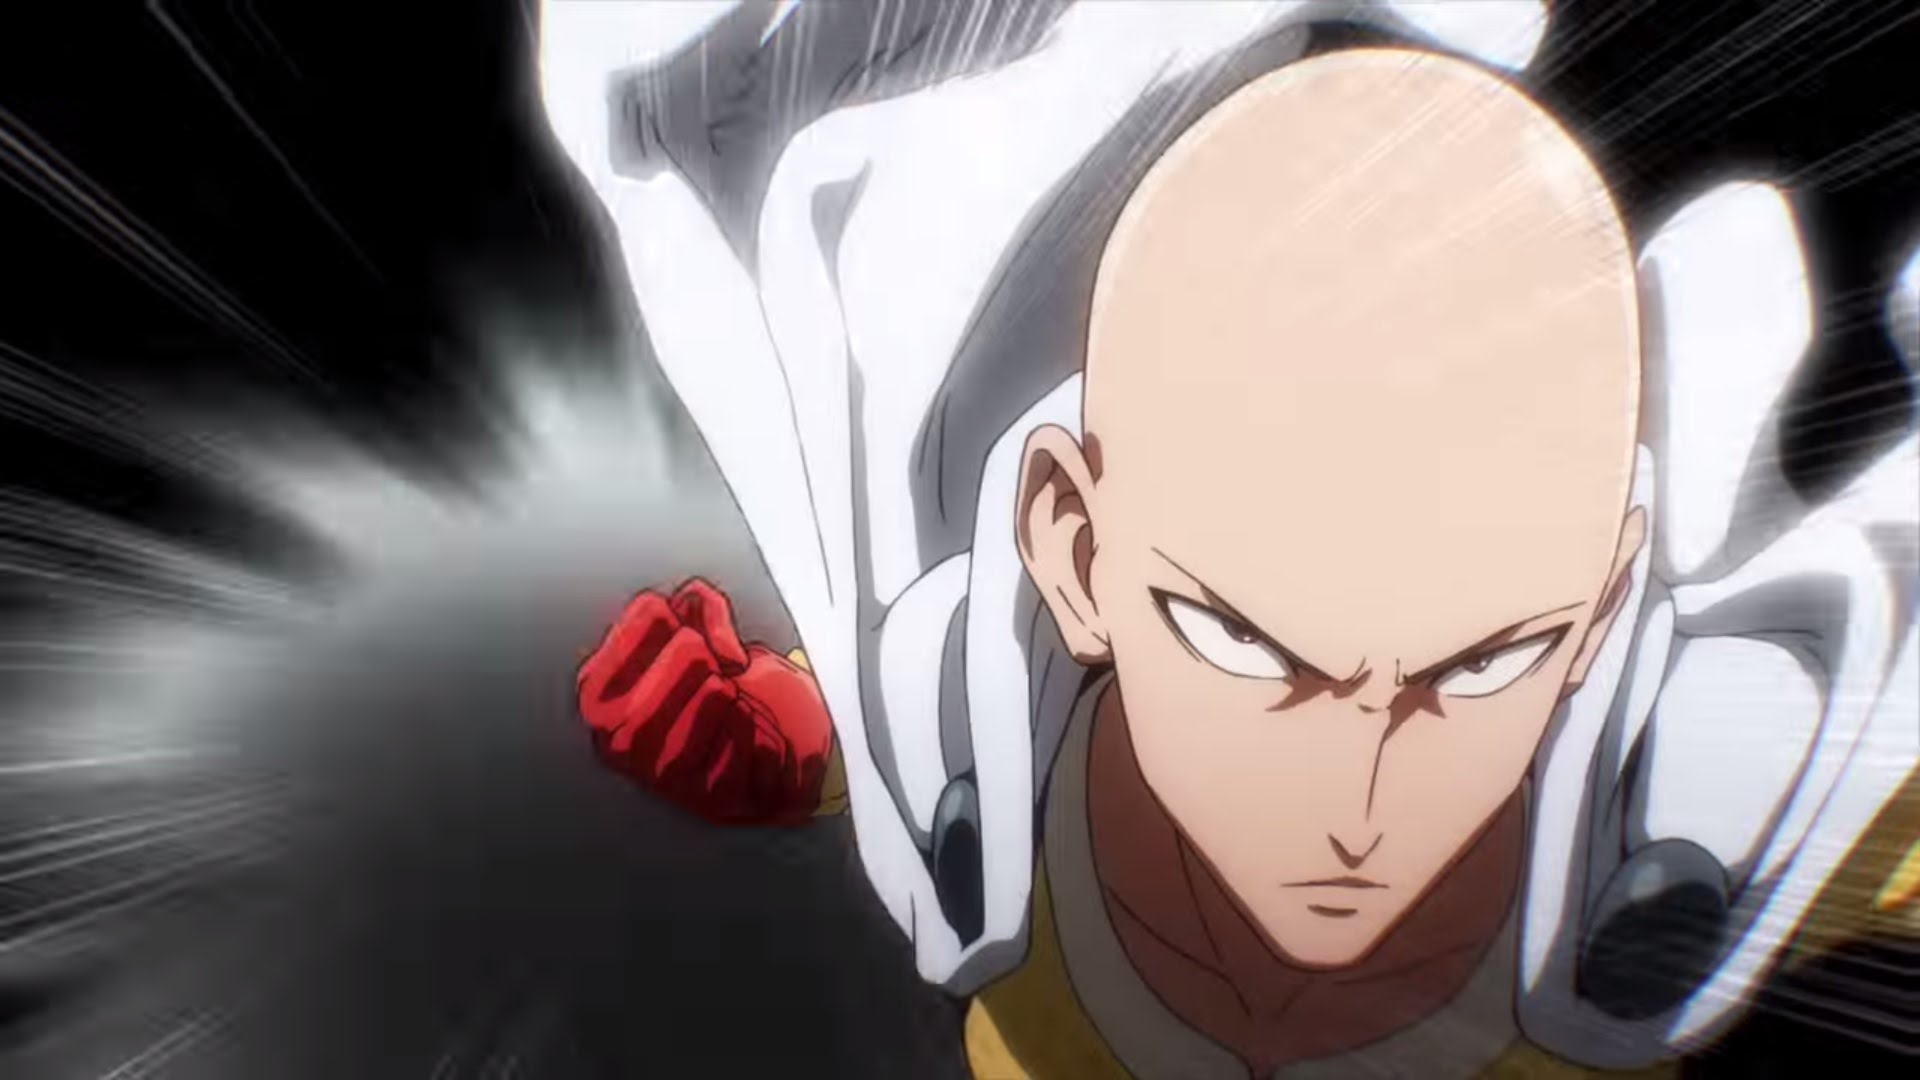 How to stream One Punch Man